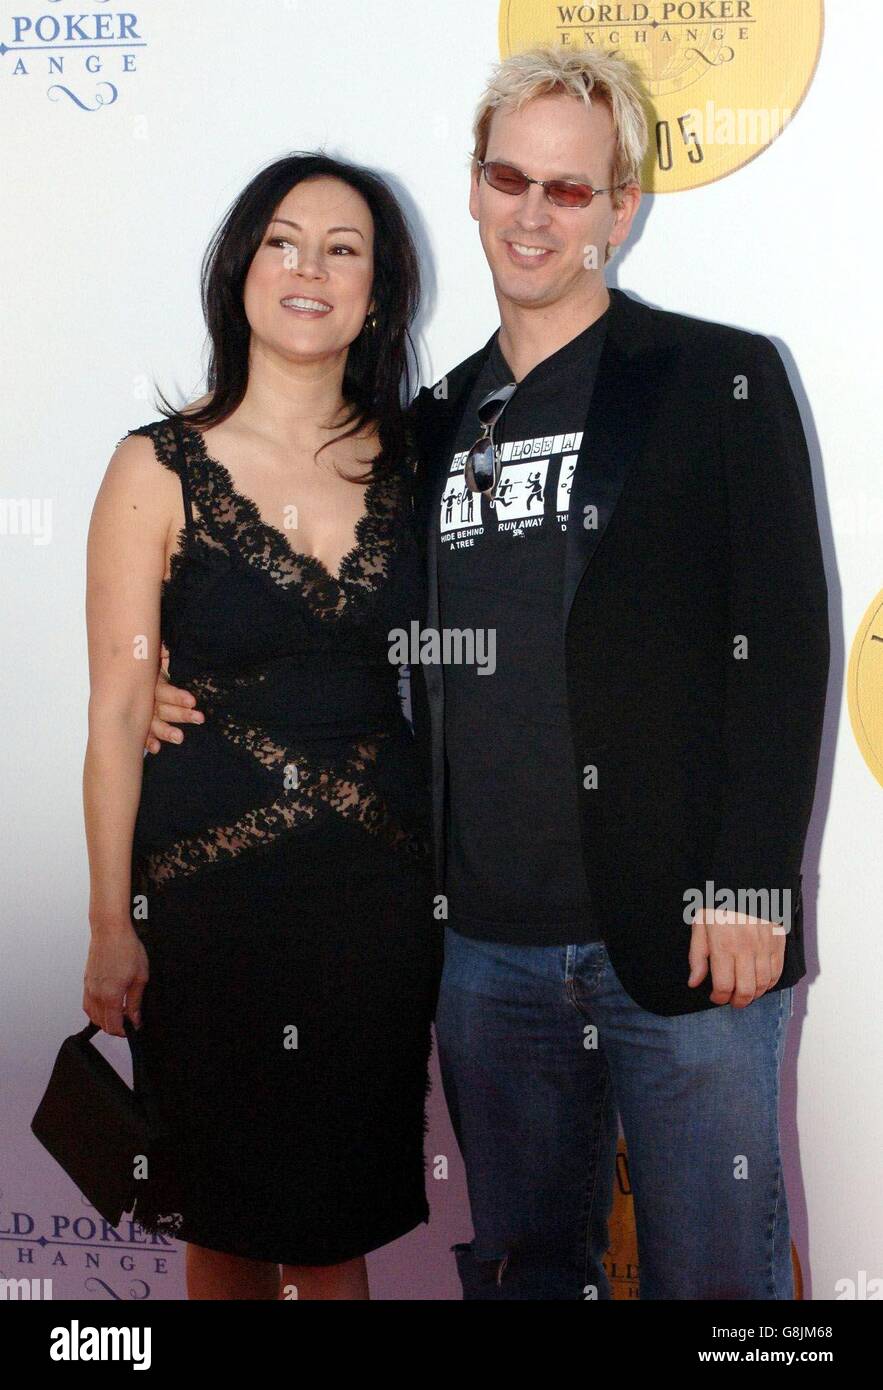 World Poker Exchange London Open Launch Party - Old Billingsgate Market. American actress Jennifer Tilly and Phil Laak. Stock Photo